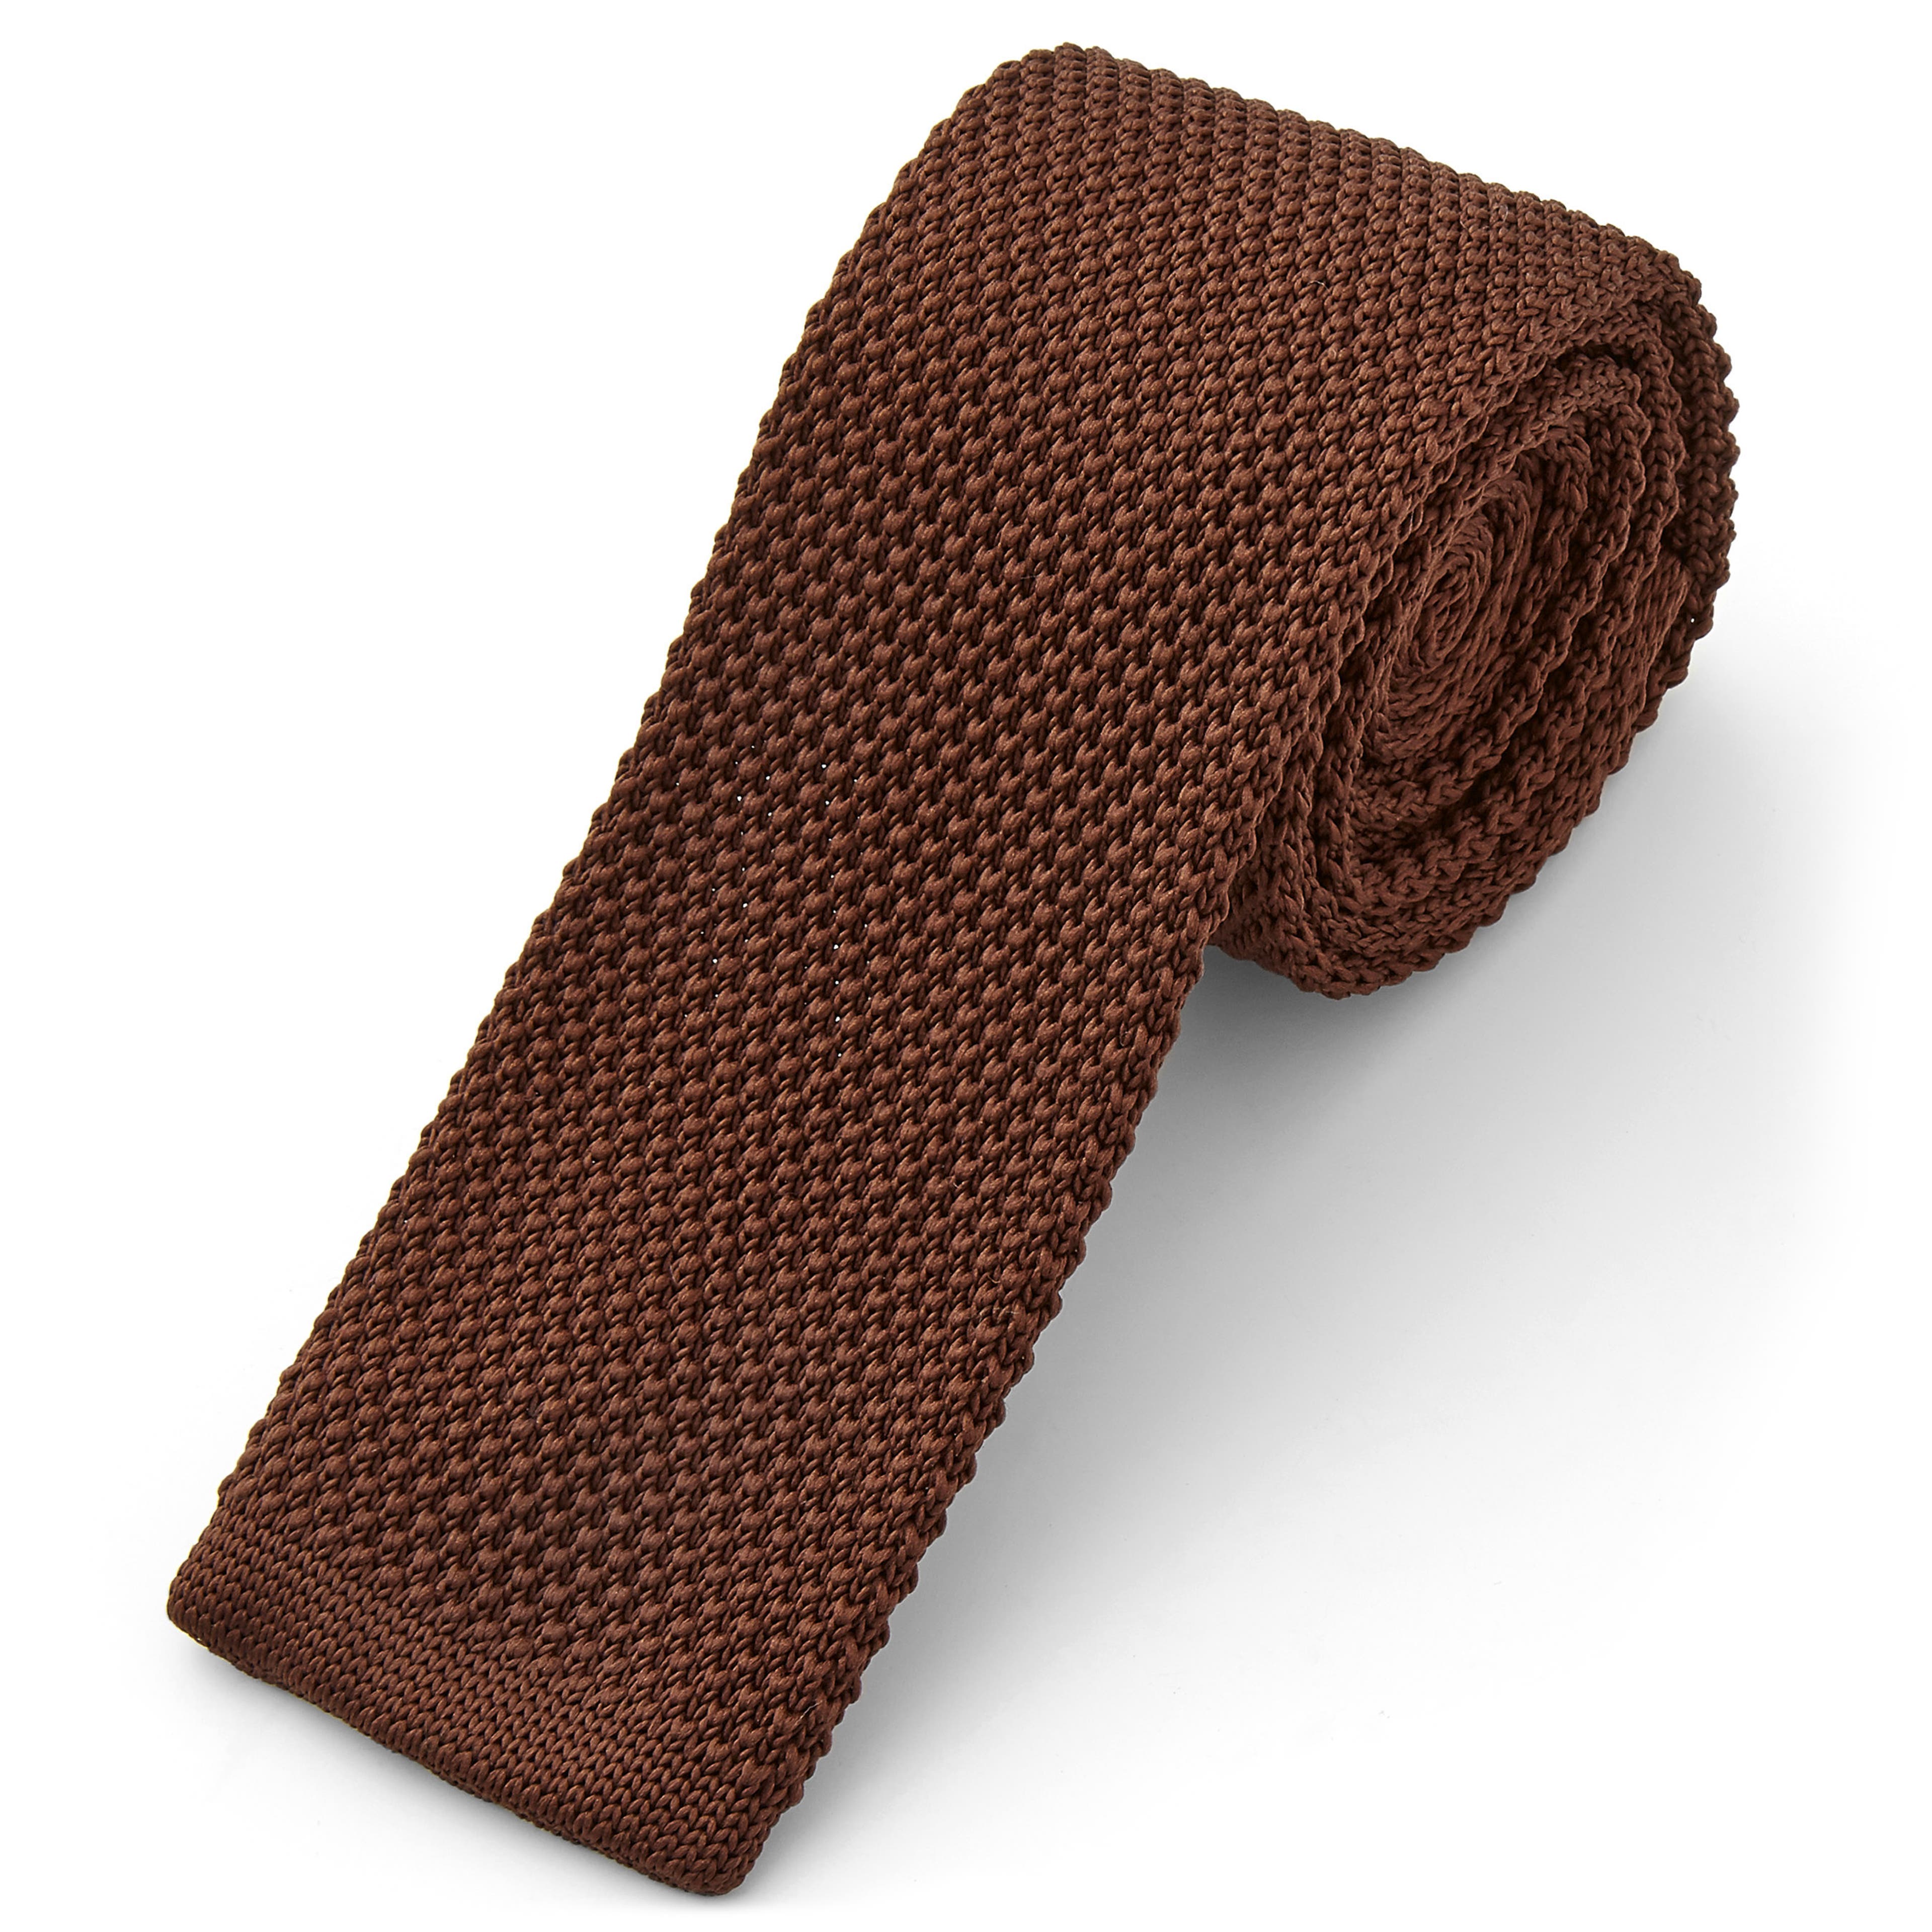 Chocolate Knitted Tie